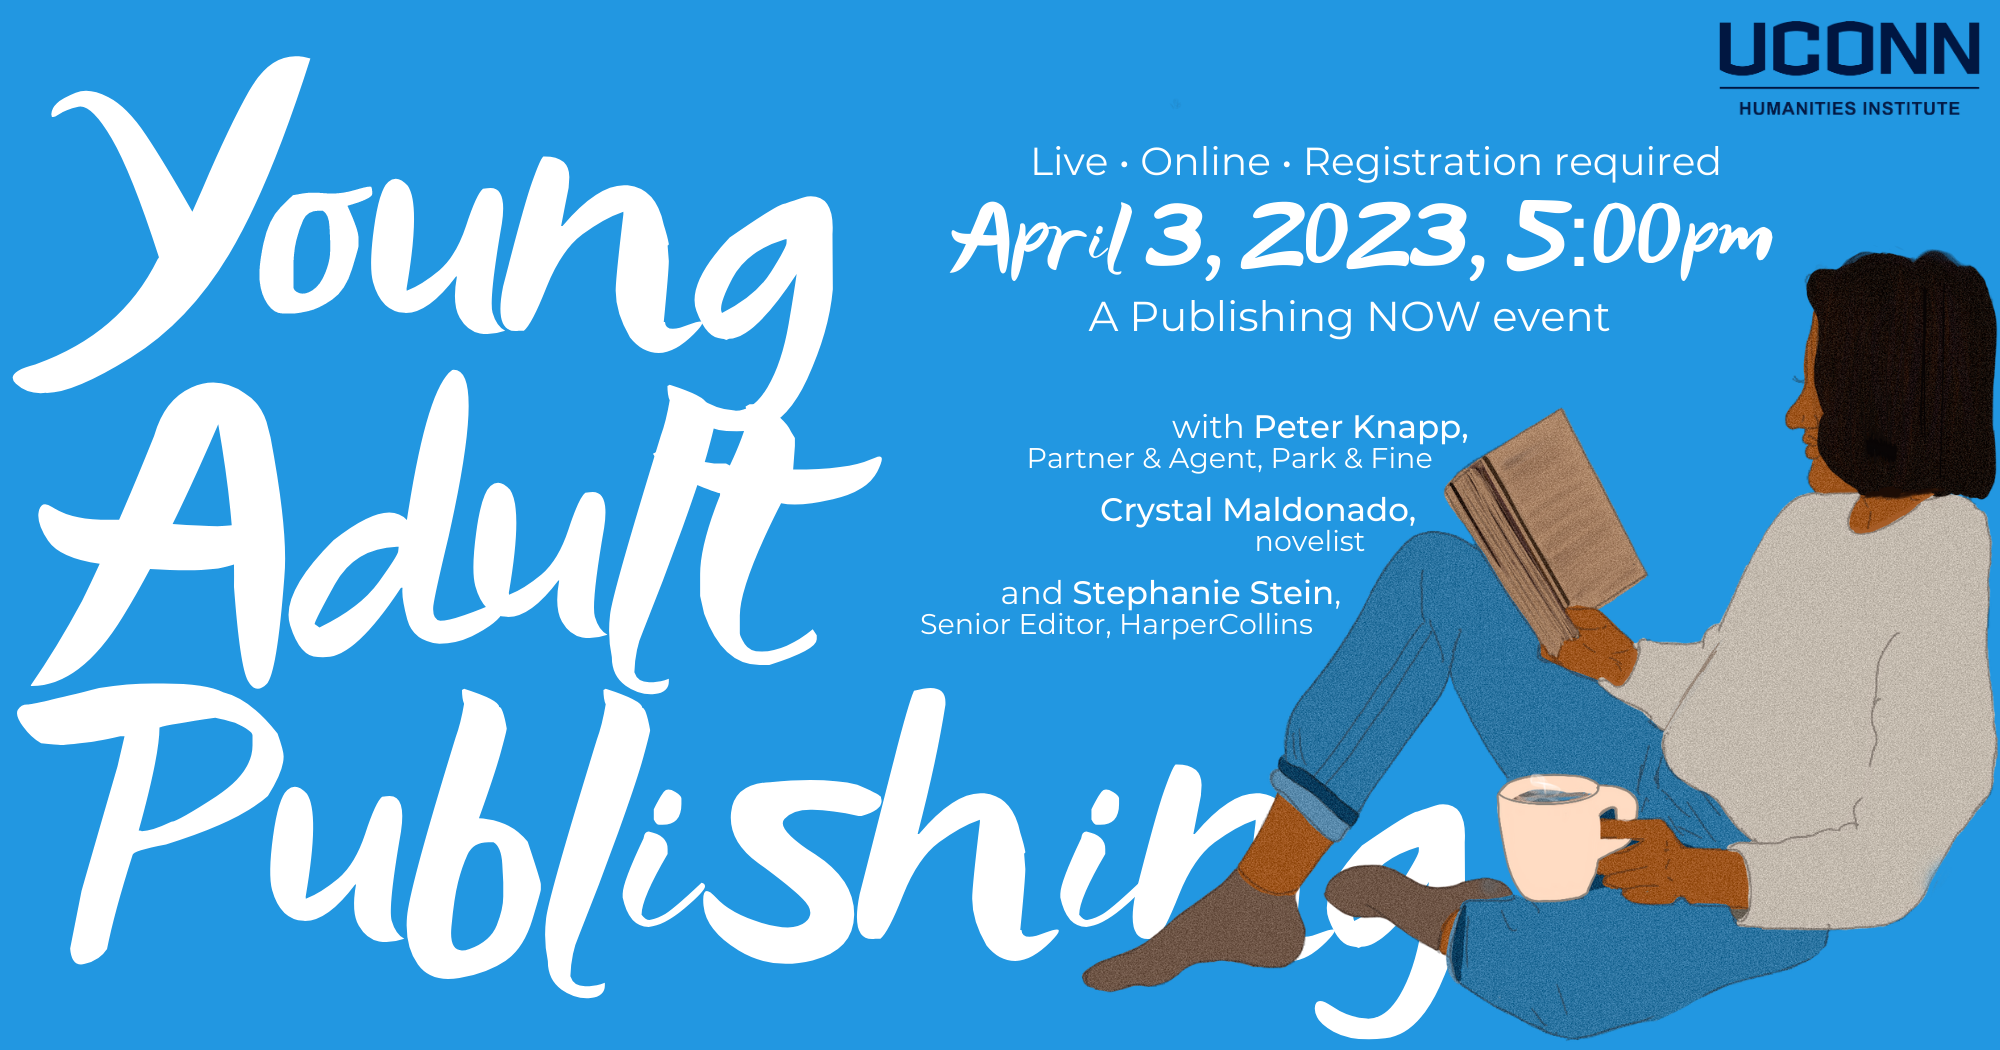 Young Adult Publishing with Peter Knapp, Partner & Agent, Park & Fine; Crystal Maldonado, novelist; and Stephanie Stein, Senior Editor, HarperCollins. Live, online, registration required. April 3, 2023, 5:00pm. A publishing Now event. UConn humanities Institute